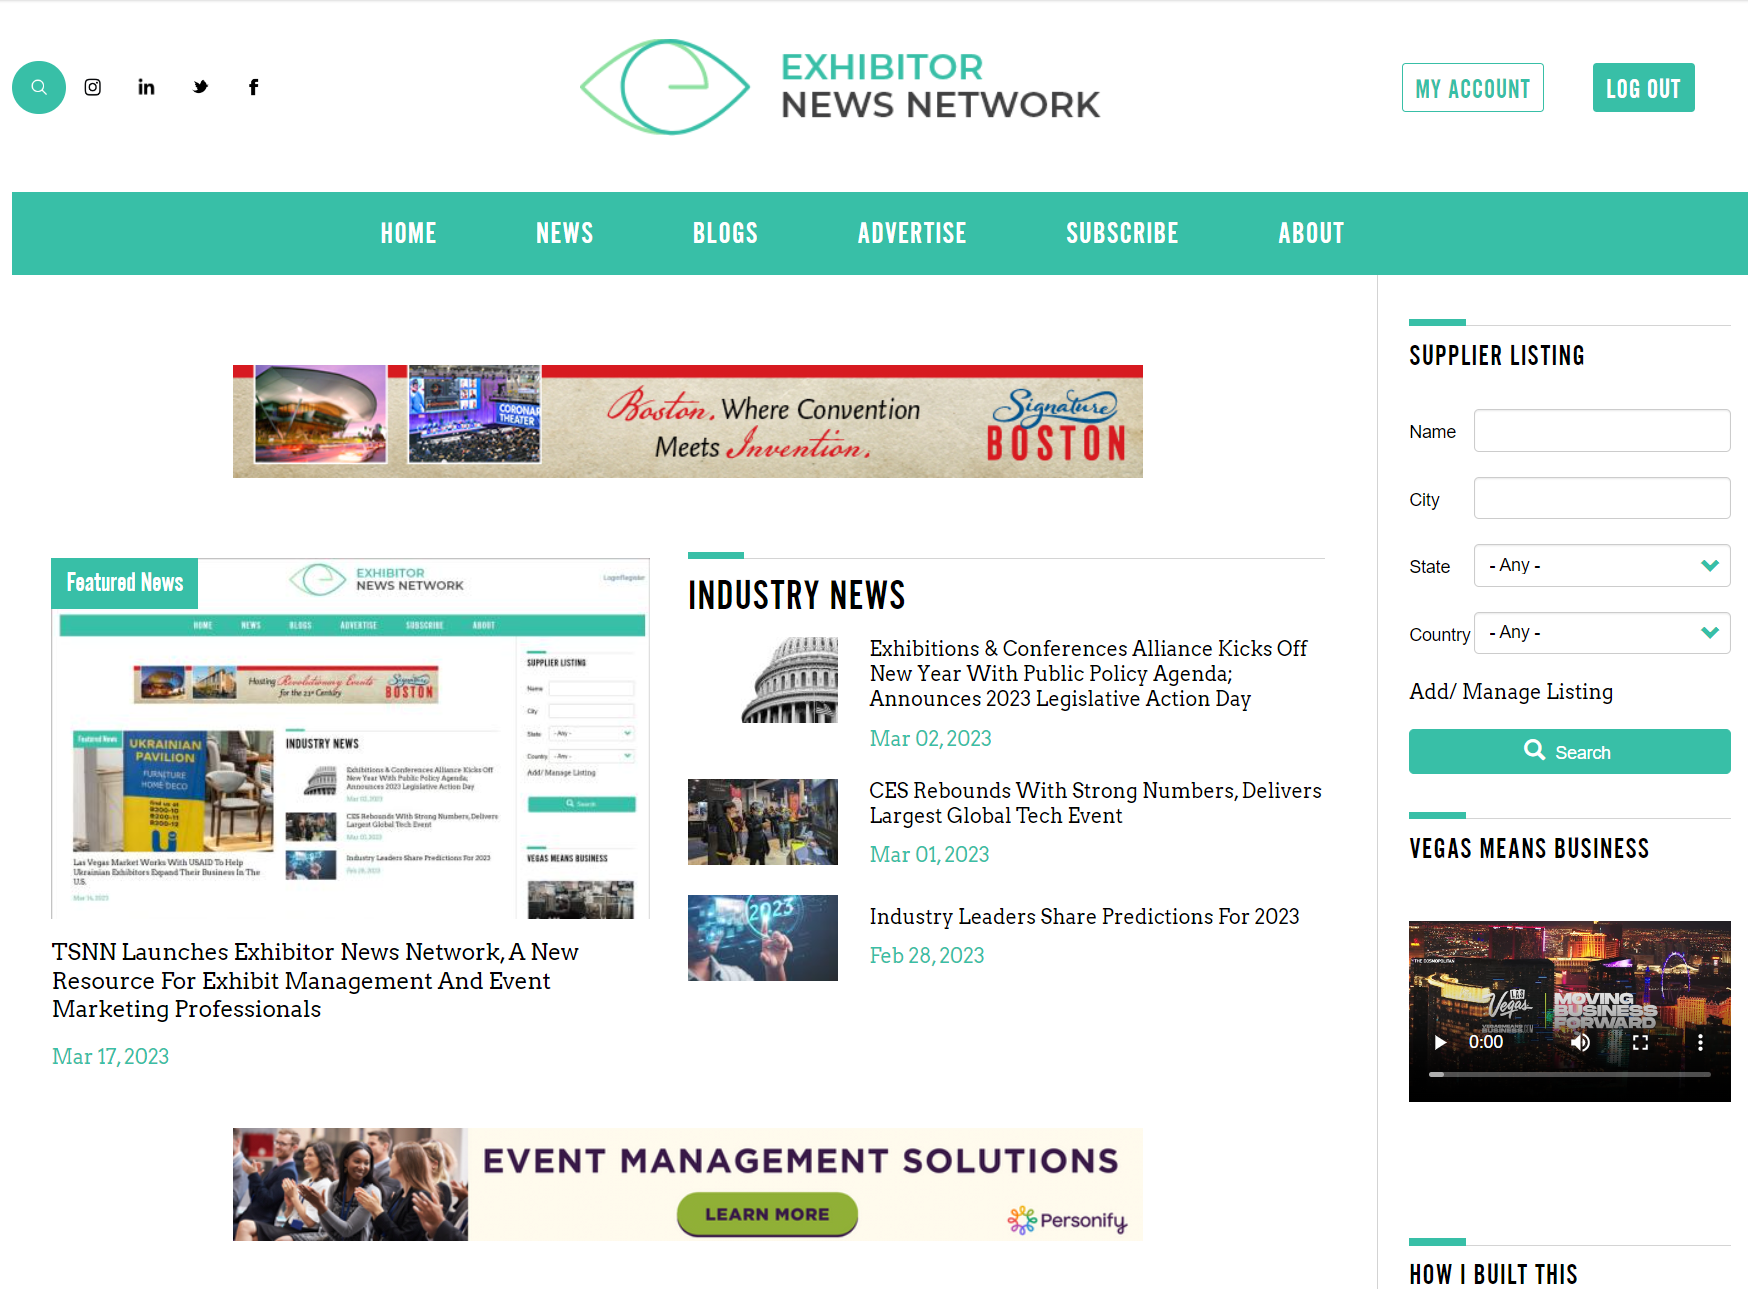 TSNN Launches Exhibitor News Network, a New Resource for Exhibit Management and ..